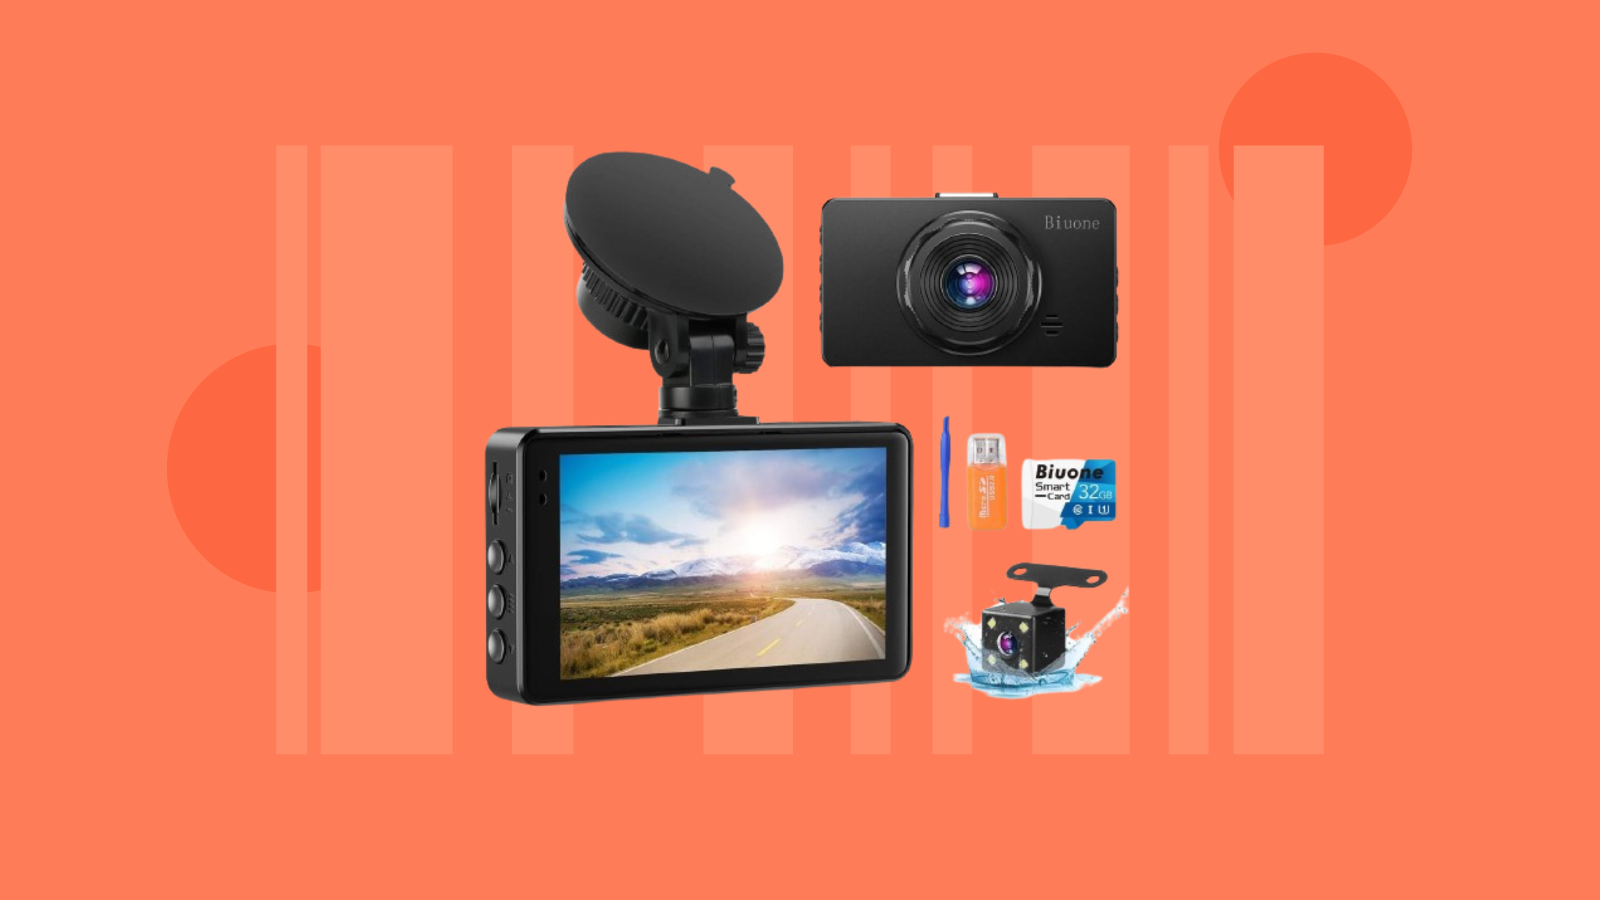 Best Dash Cam Deals: Basic Cams, 4K Models and More Starting From $25 - CNET